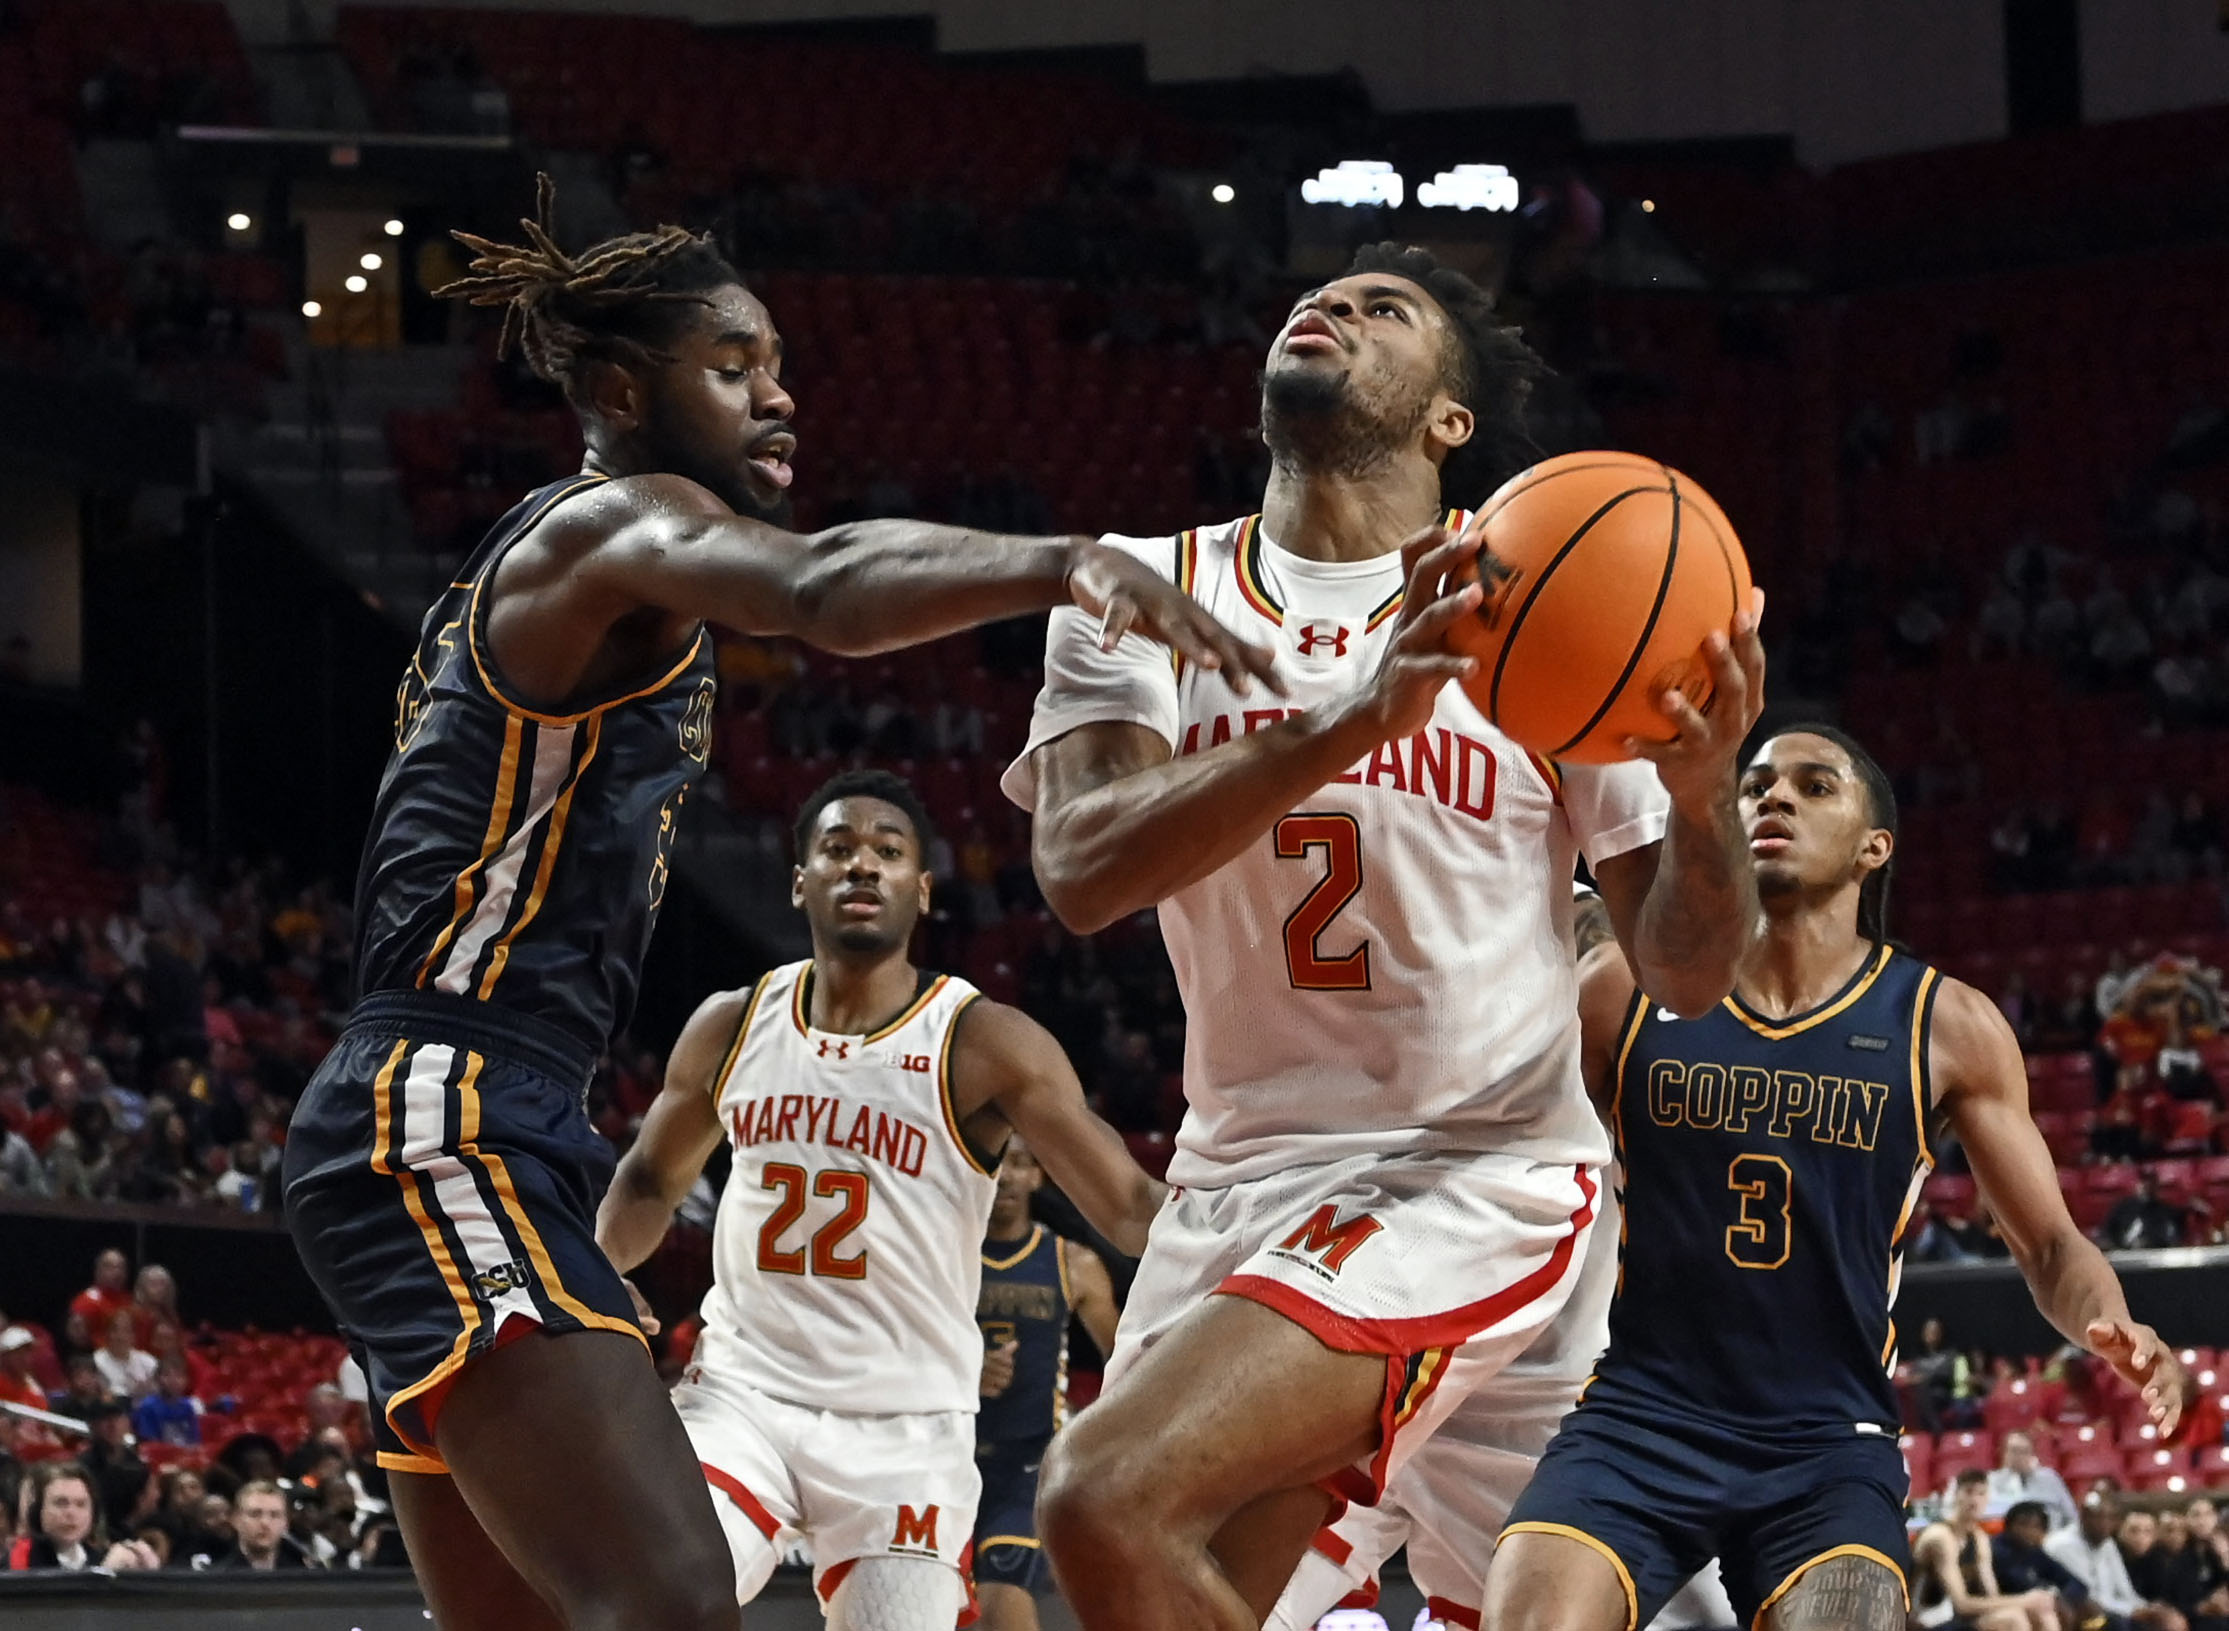 Marylandxe2x80x99s Jahari Long, right, goes to the basket against Coppin Statexe2x80x99s Justin Winston, left, in the second half. Maryland defeated Coppin State 75-53 at Xfinity Center. (Kenneth K. Lam/Staff photo)